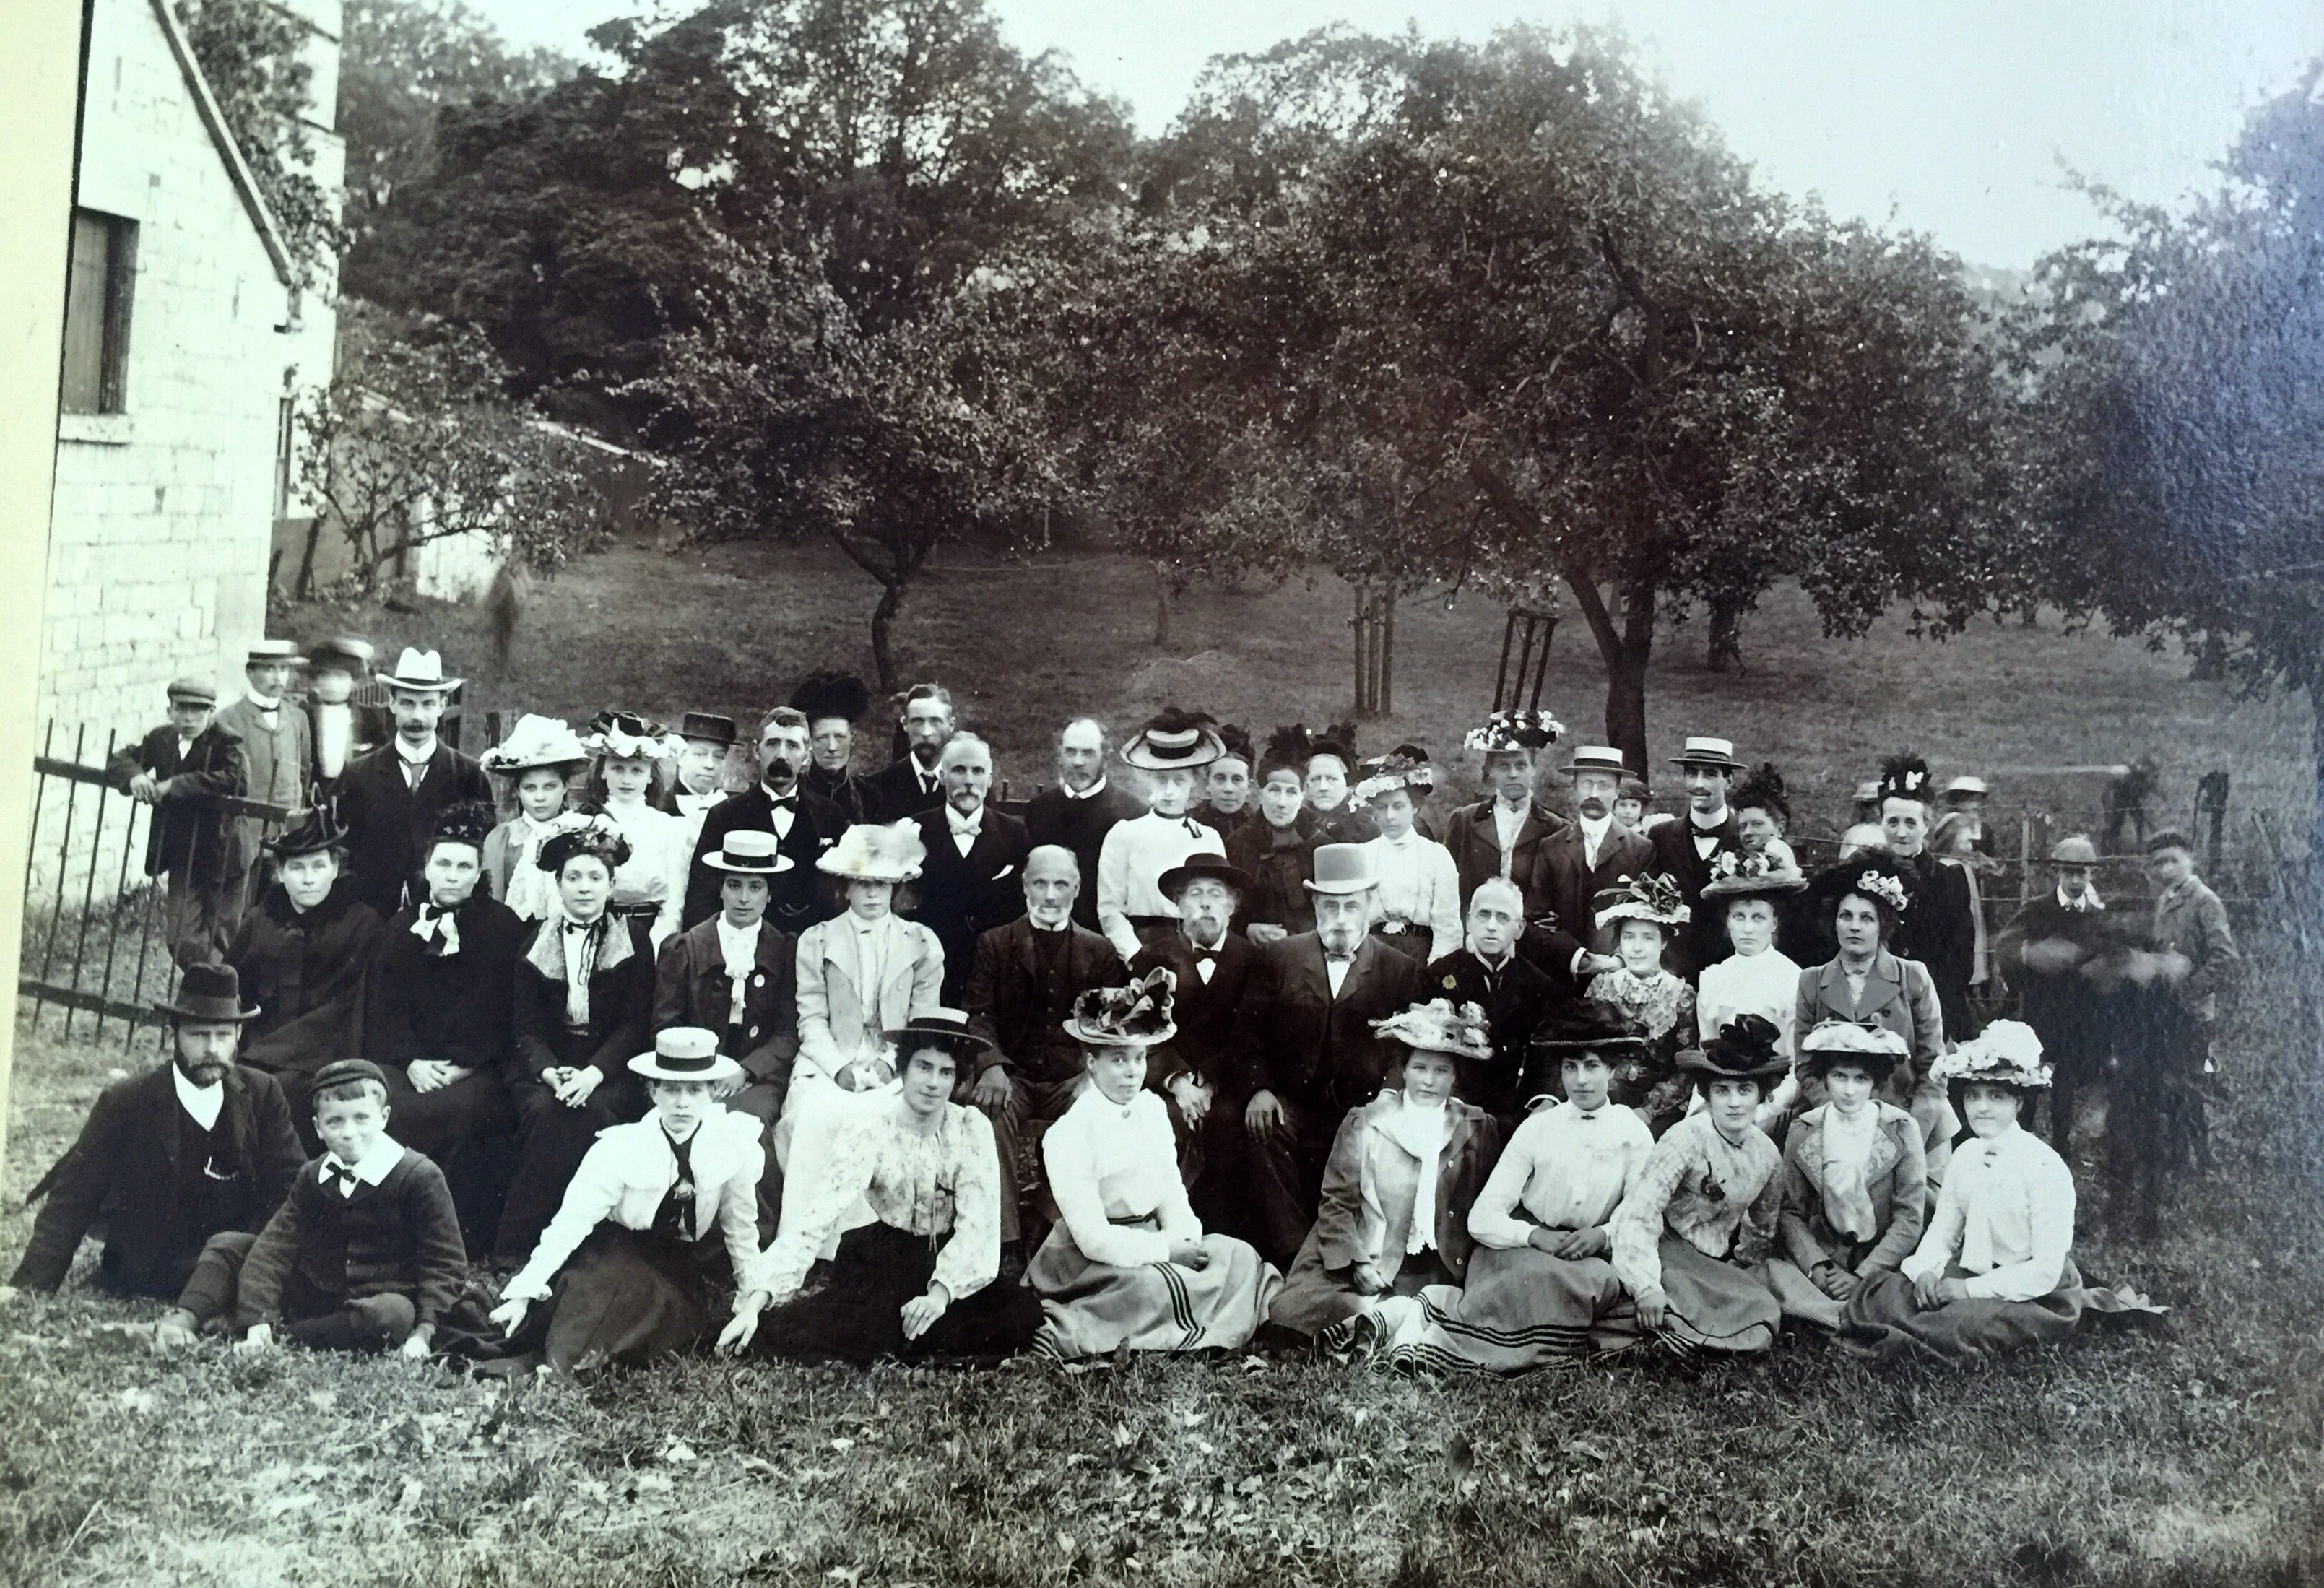 My great grandmothers Sunday school outing. 
Early 1900s